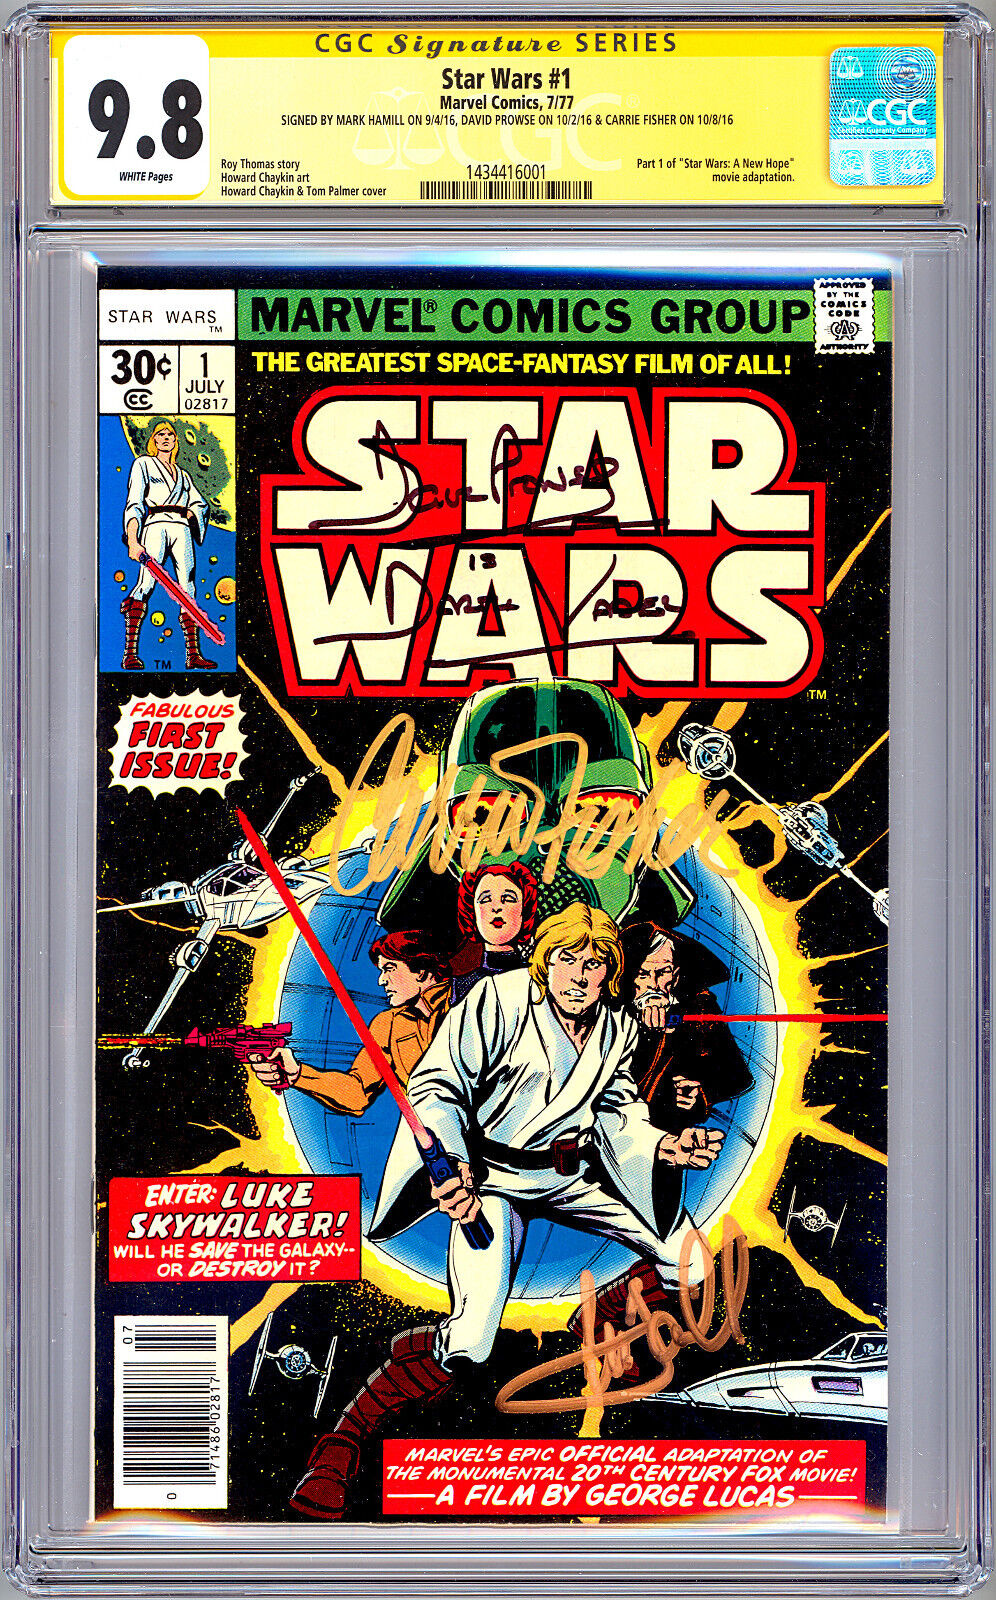 STAR WARS #1 CGC-SS 9.8 SIGNED 3X BY CARRIE FISHER MARK HAMILL DAVID PROWSE 1977